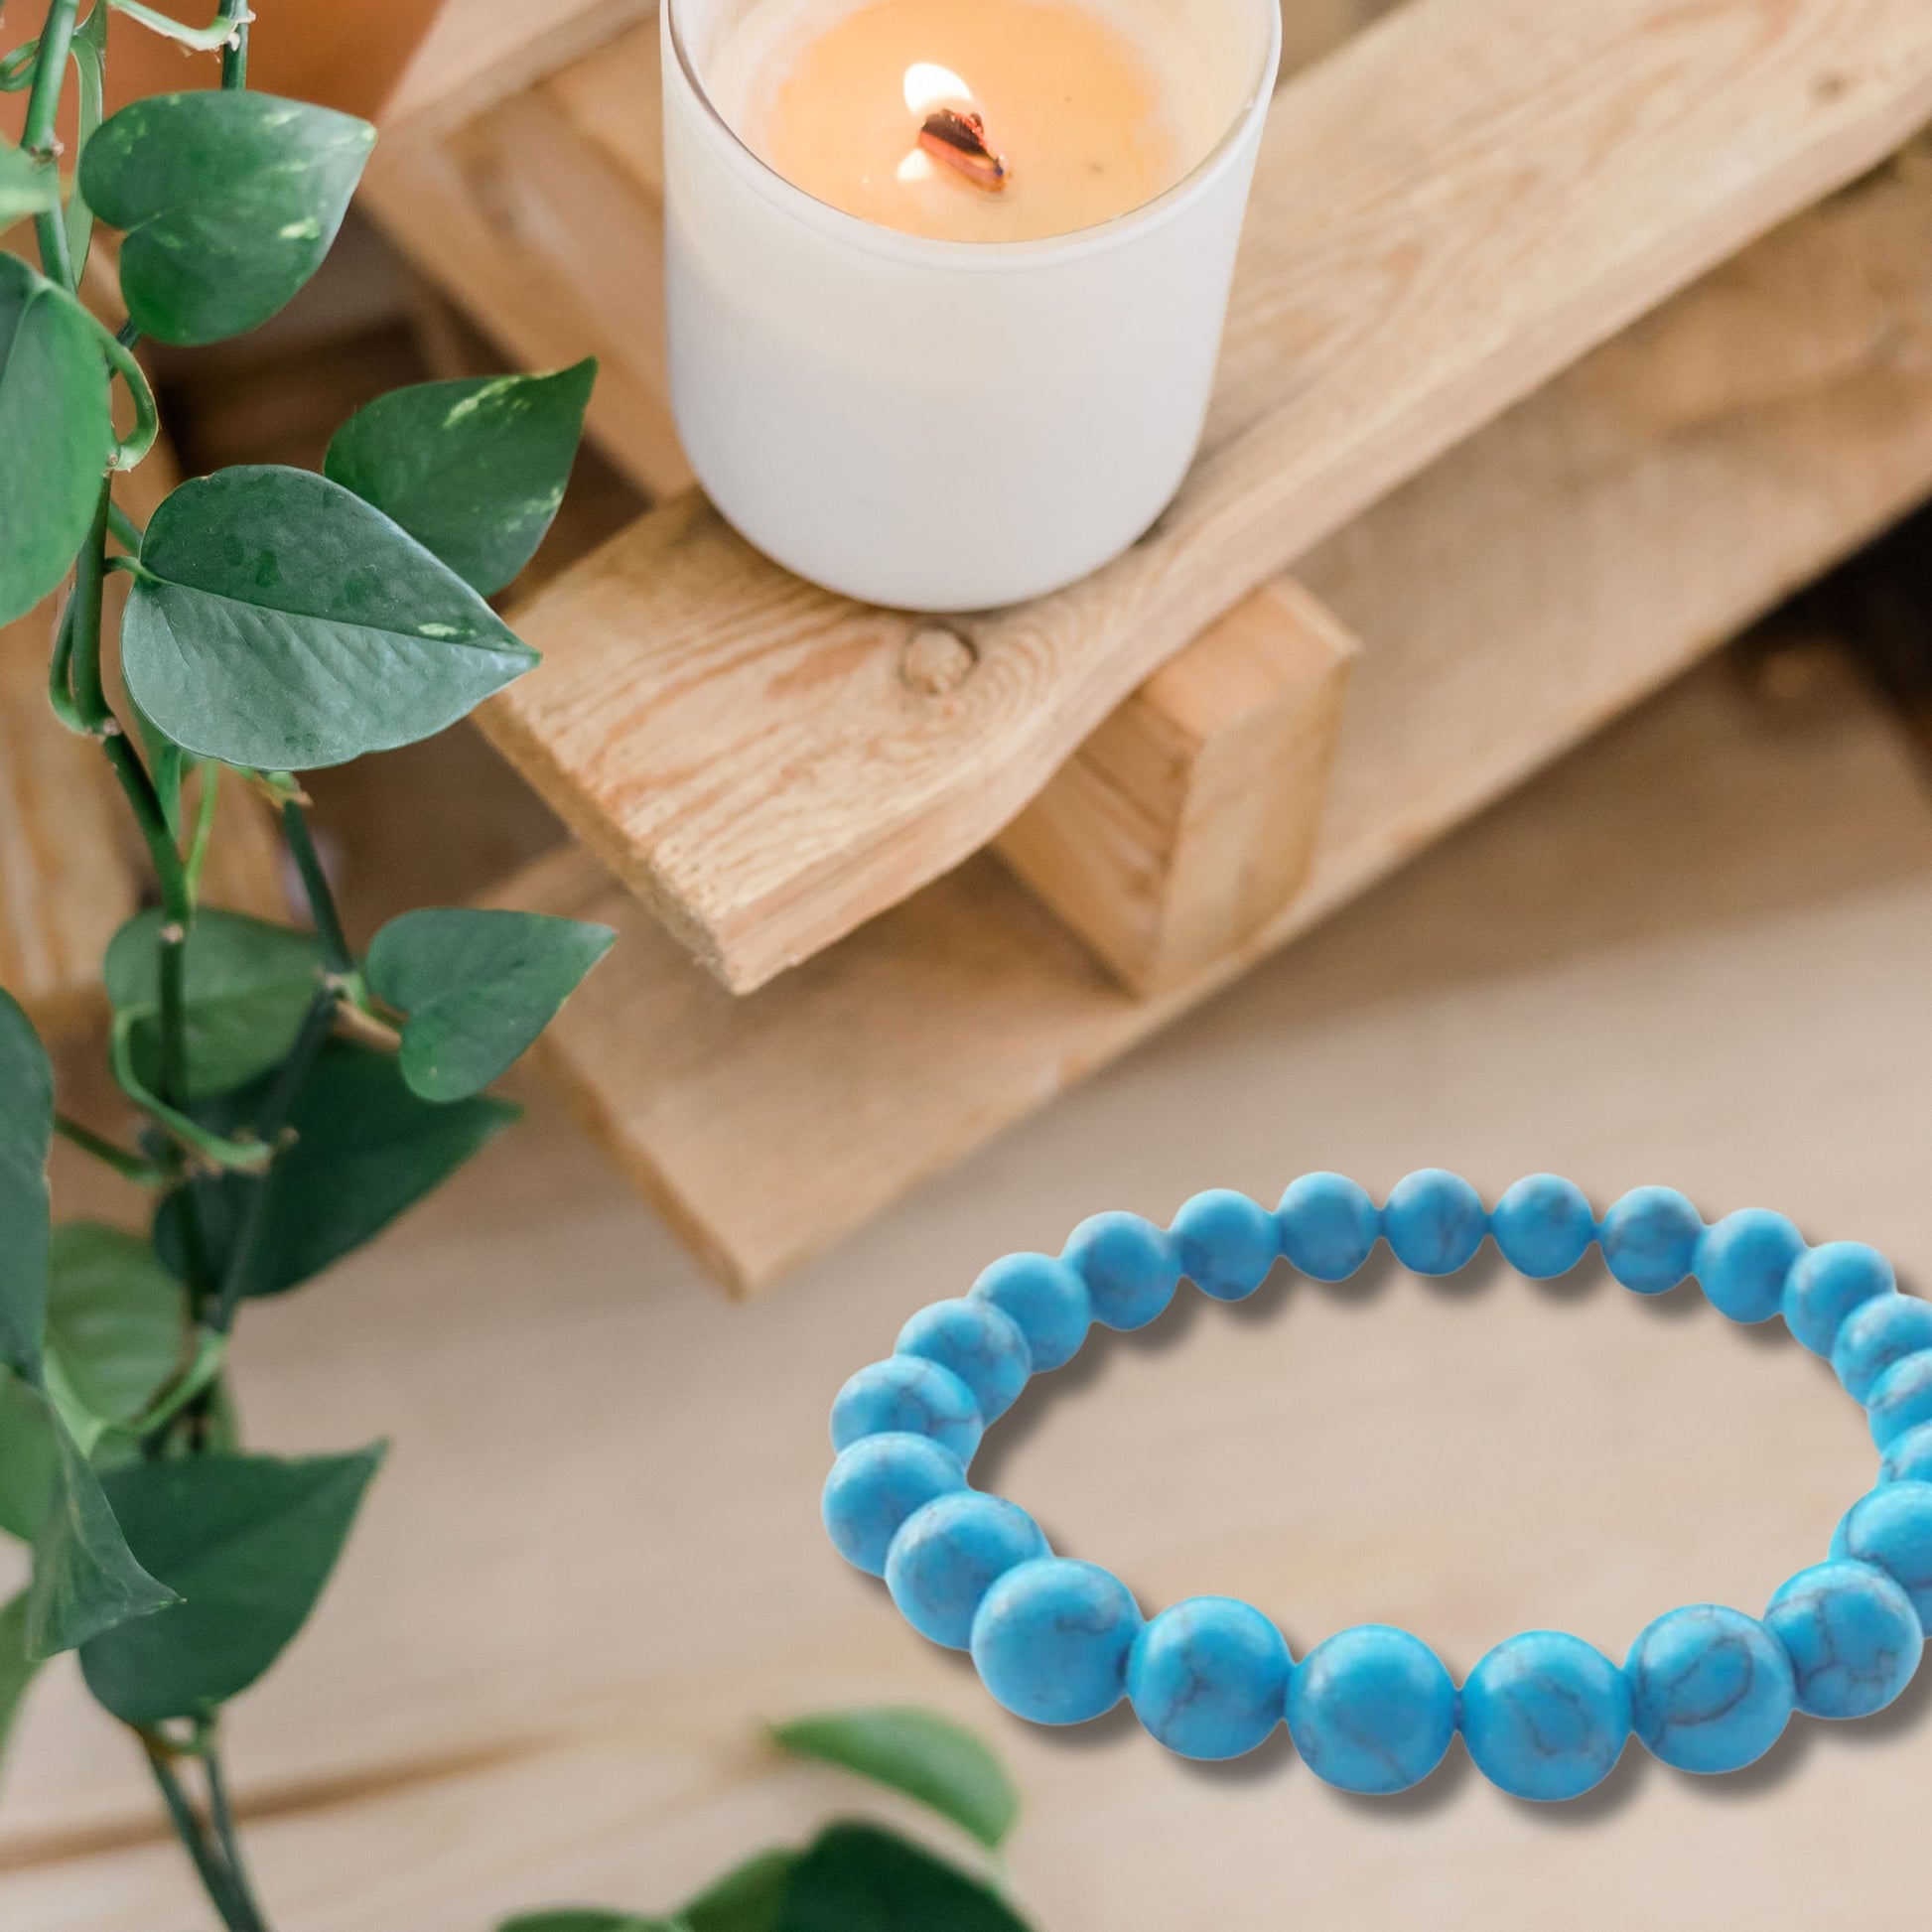 Natural Healing Turquoise Stretch Bracelet